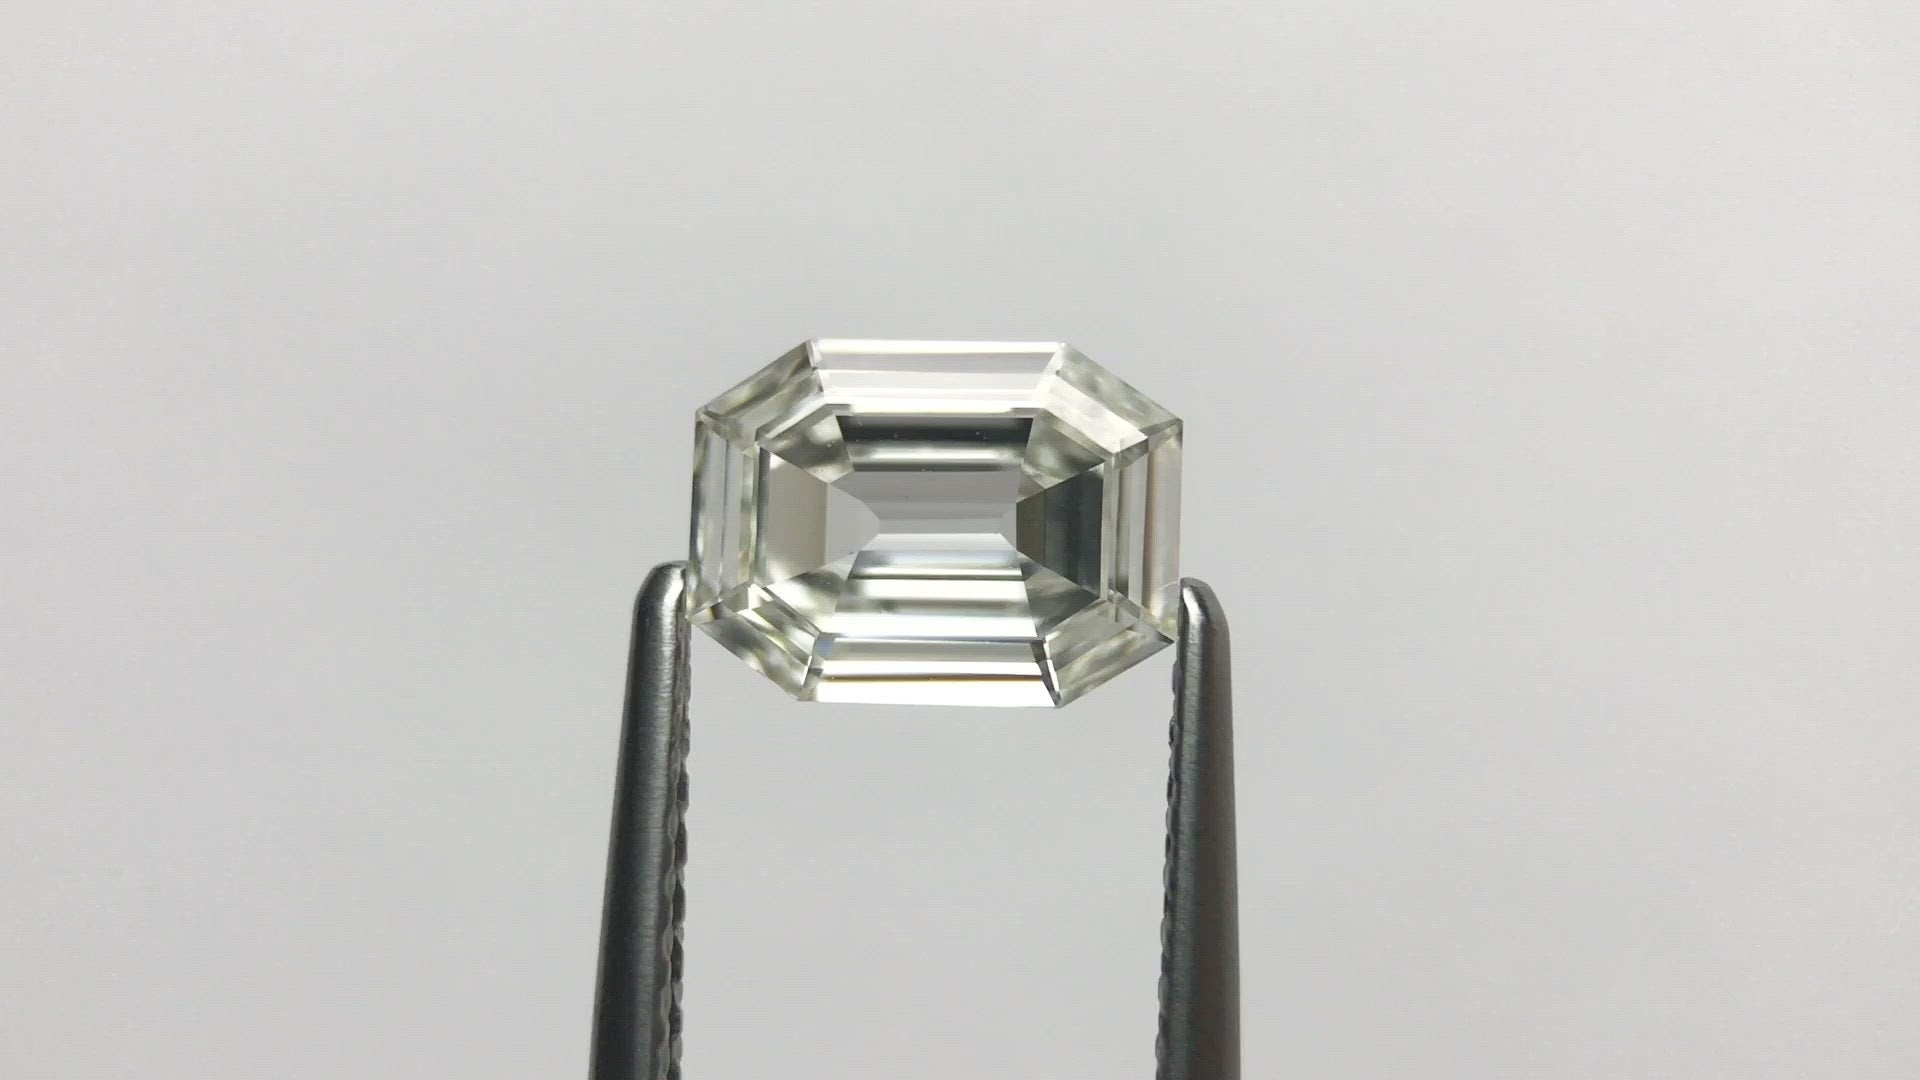 1.01ct GIA Certified VS2 G color natural emerald cut diamond for custom work - inventory code ECWG101